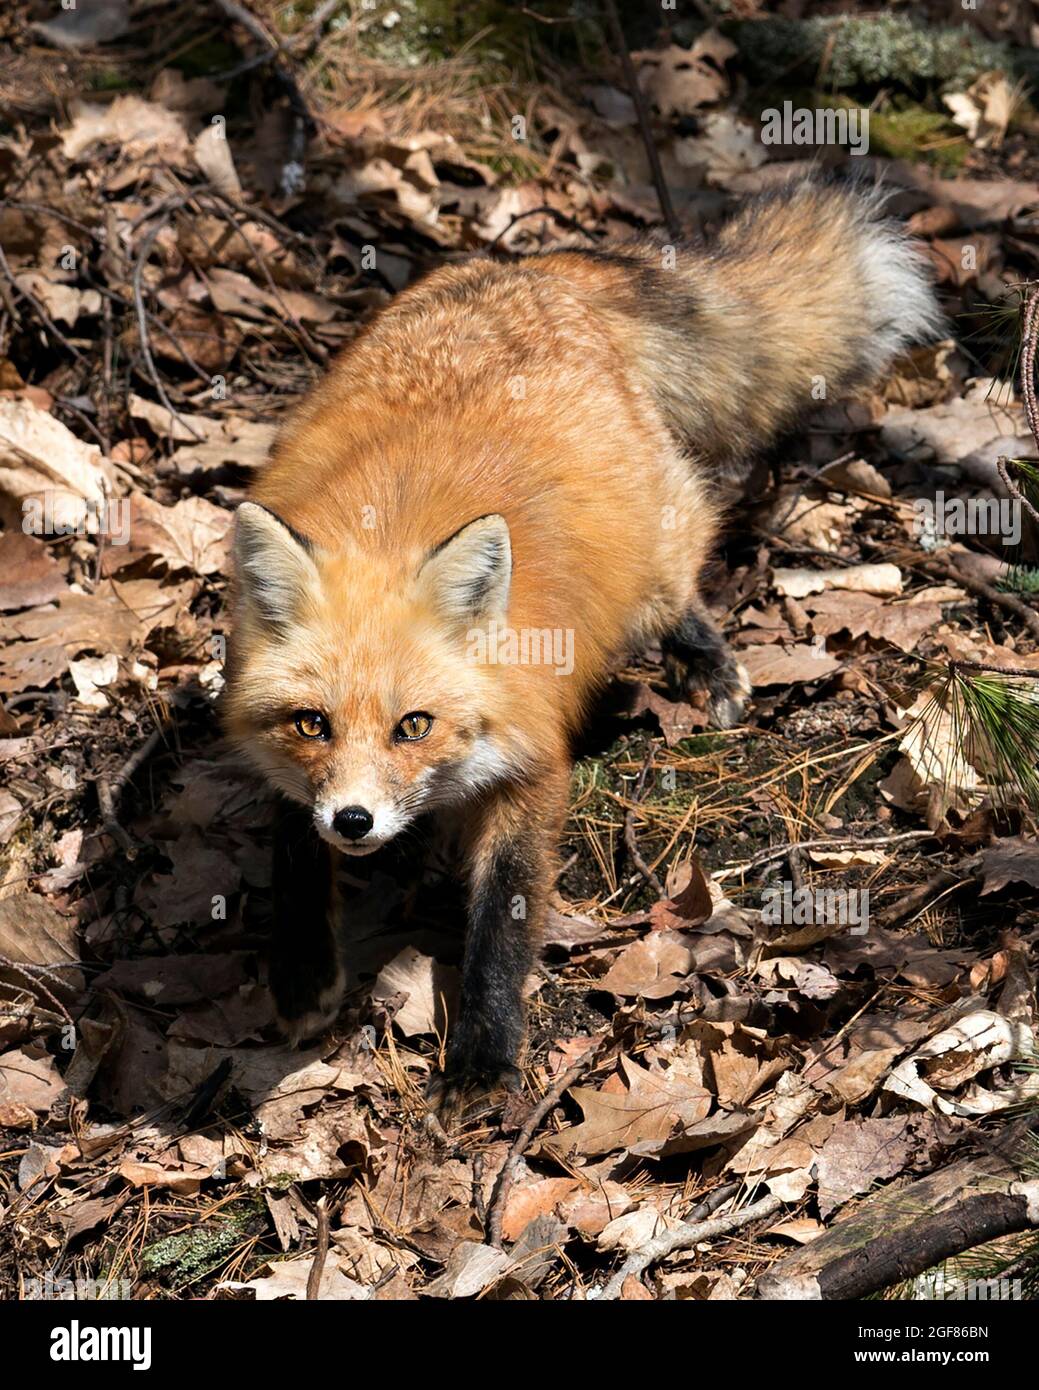 Red Fox close-up looking at camera in the spring season with blur forest background in its environment and habitat. Fox Image. Picture. Portrait. Stock Photo